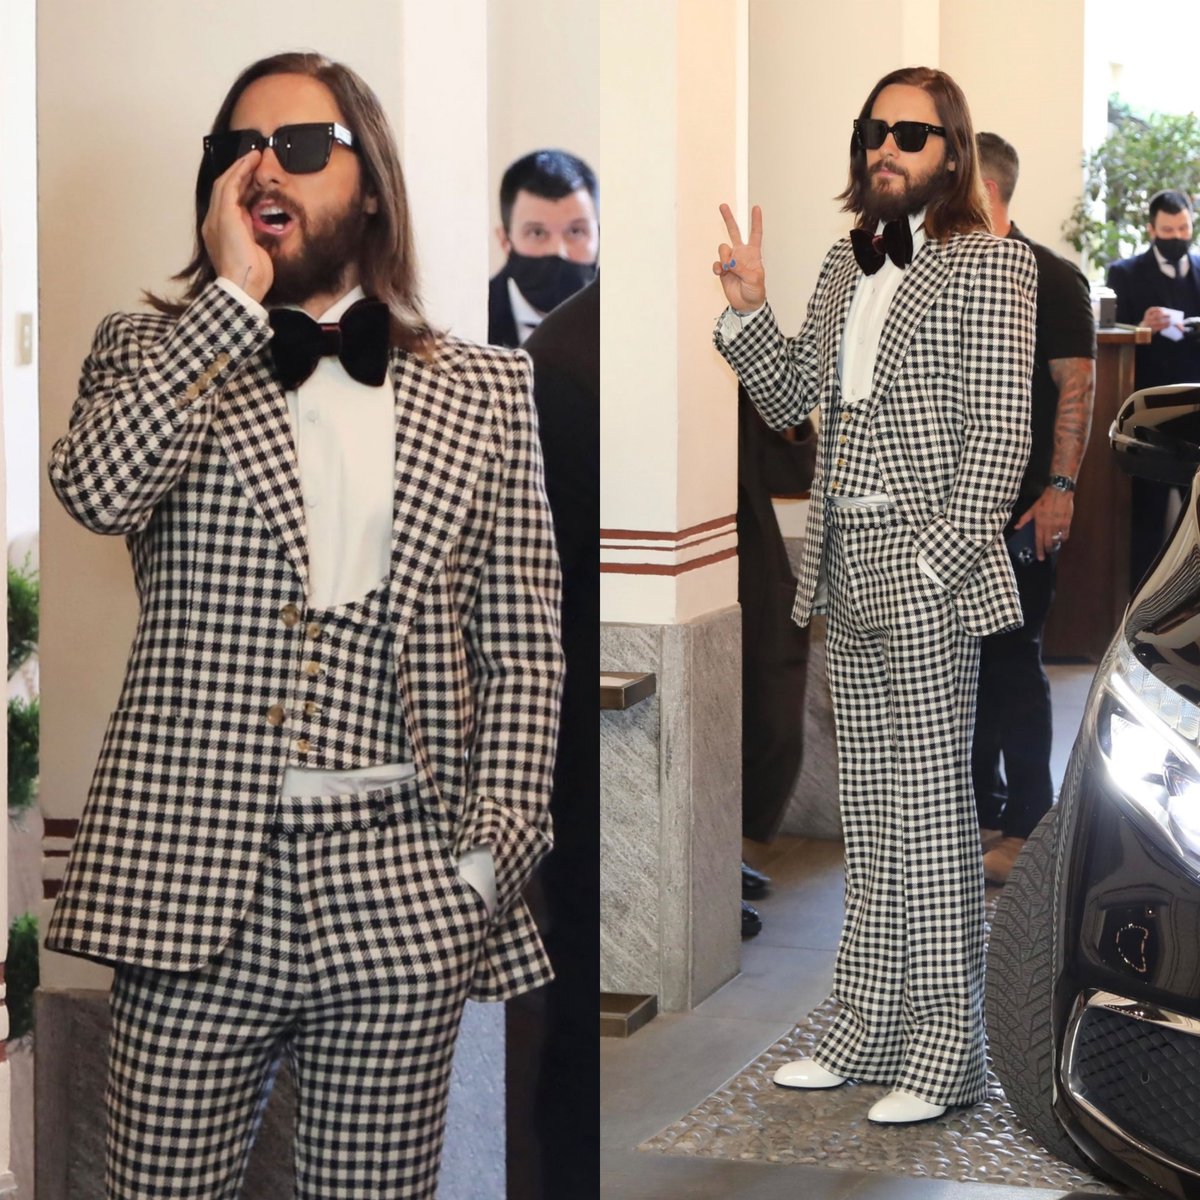 The Jared we know and love 💖💖💖💖💖 #JaredLeto #ExquisiteGucci
📷vk.com